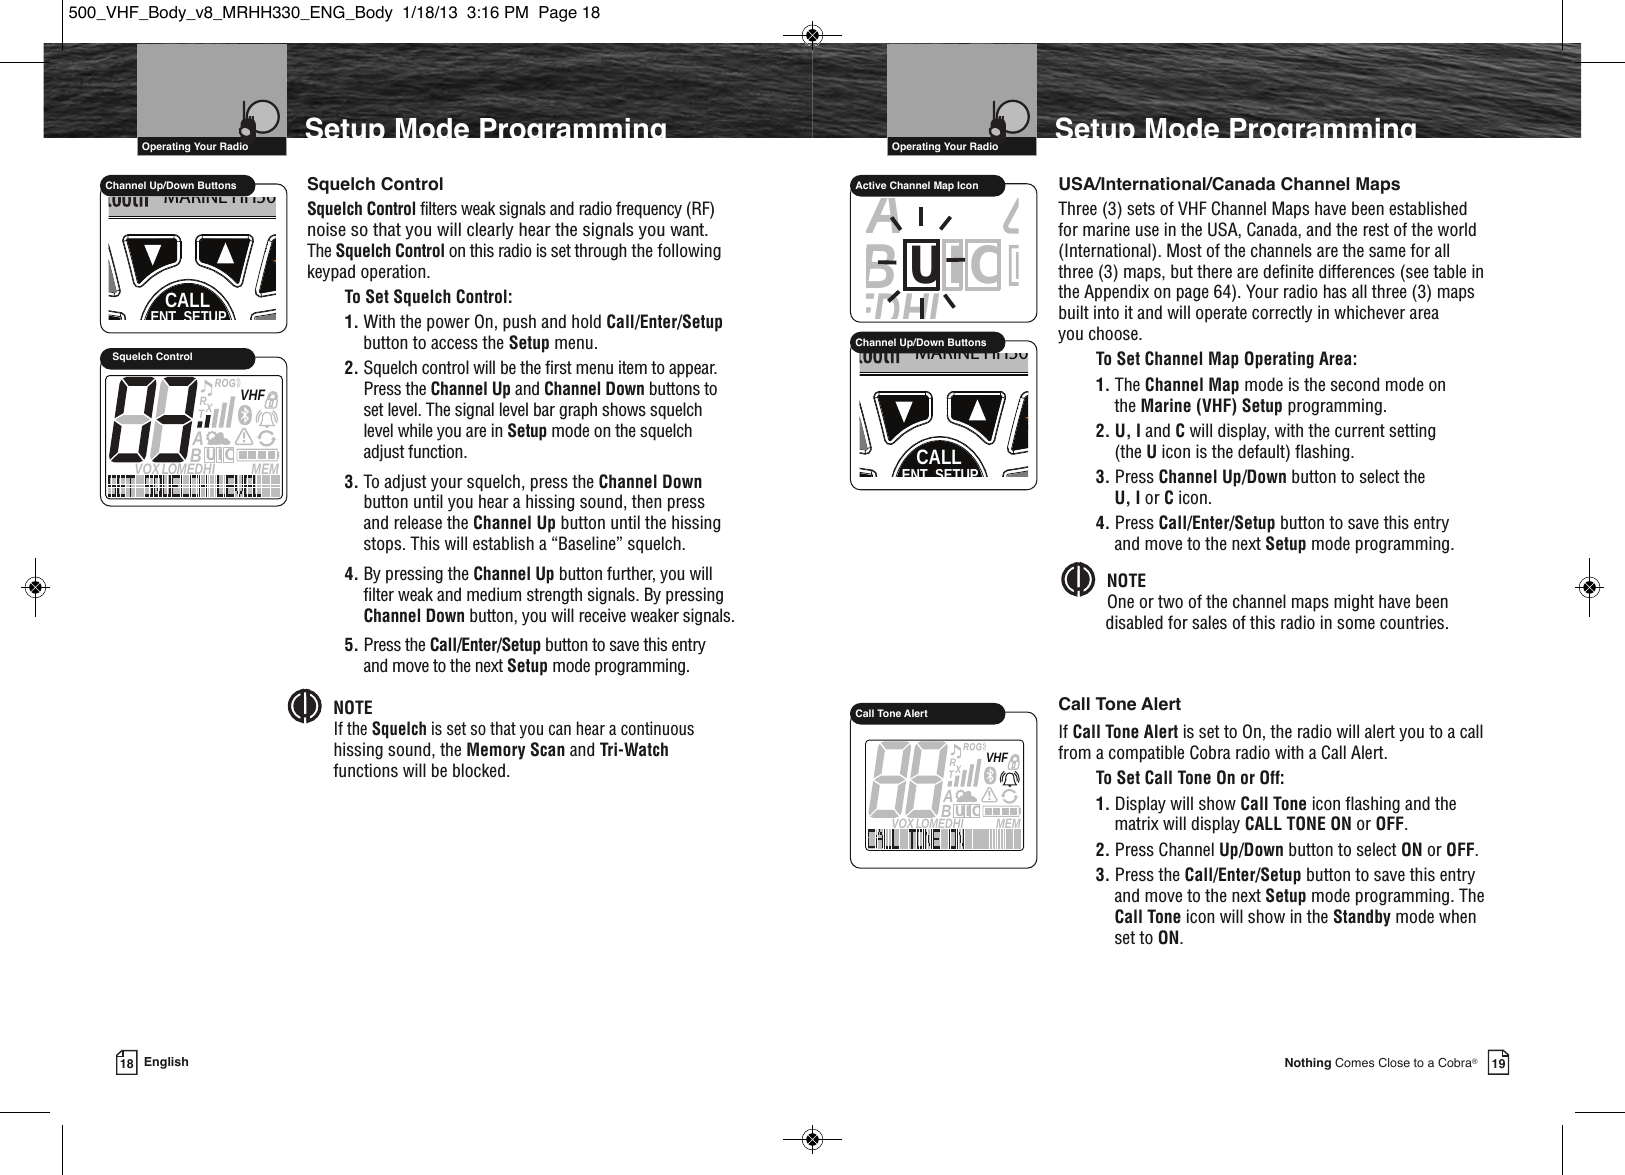 Page 12 of Cobra Electronics MRHH500 BT ACCESSORY IN MARINE RADIO User Manual MRHH330 ENG Body